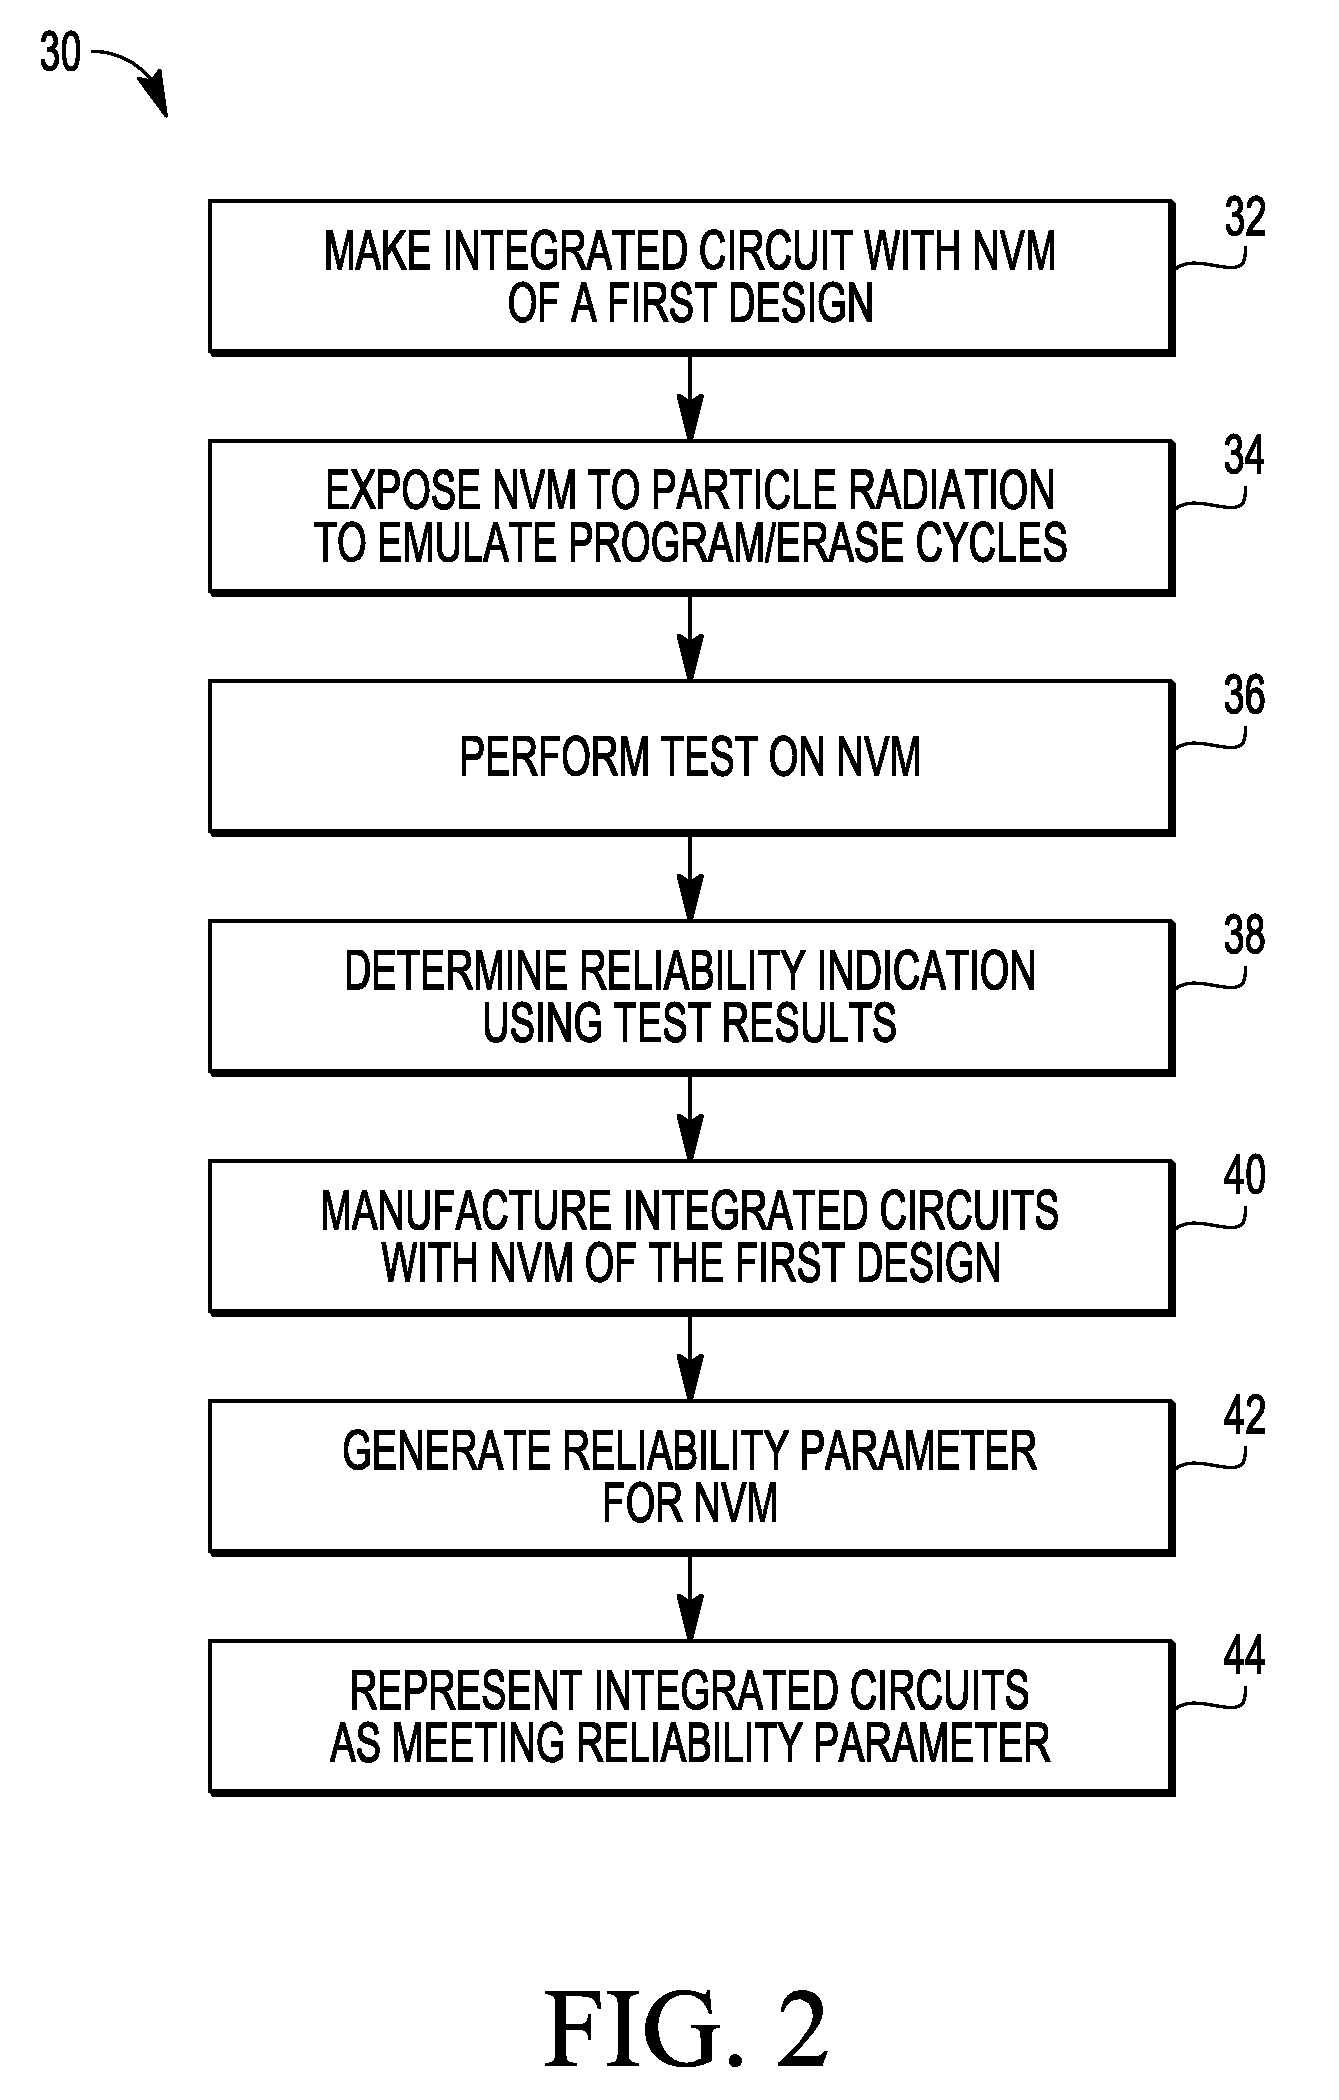 Method for simulating long-term performance of a non-volatile memory by exposing the non-volatile memory to heavy-ion radiation